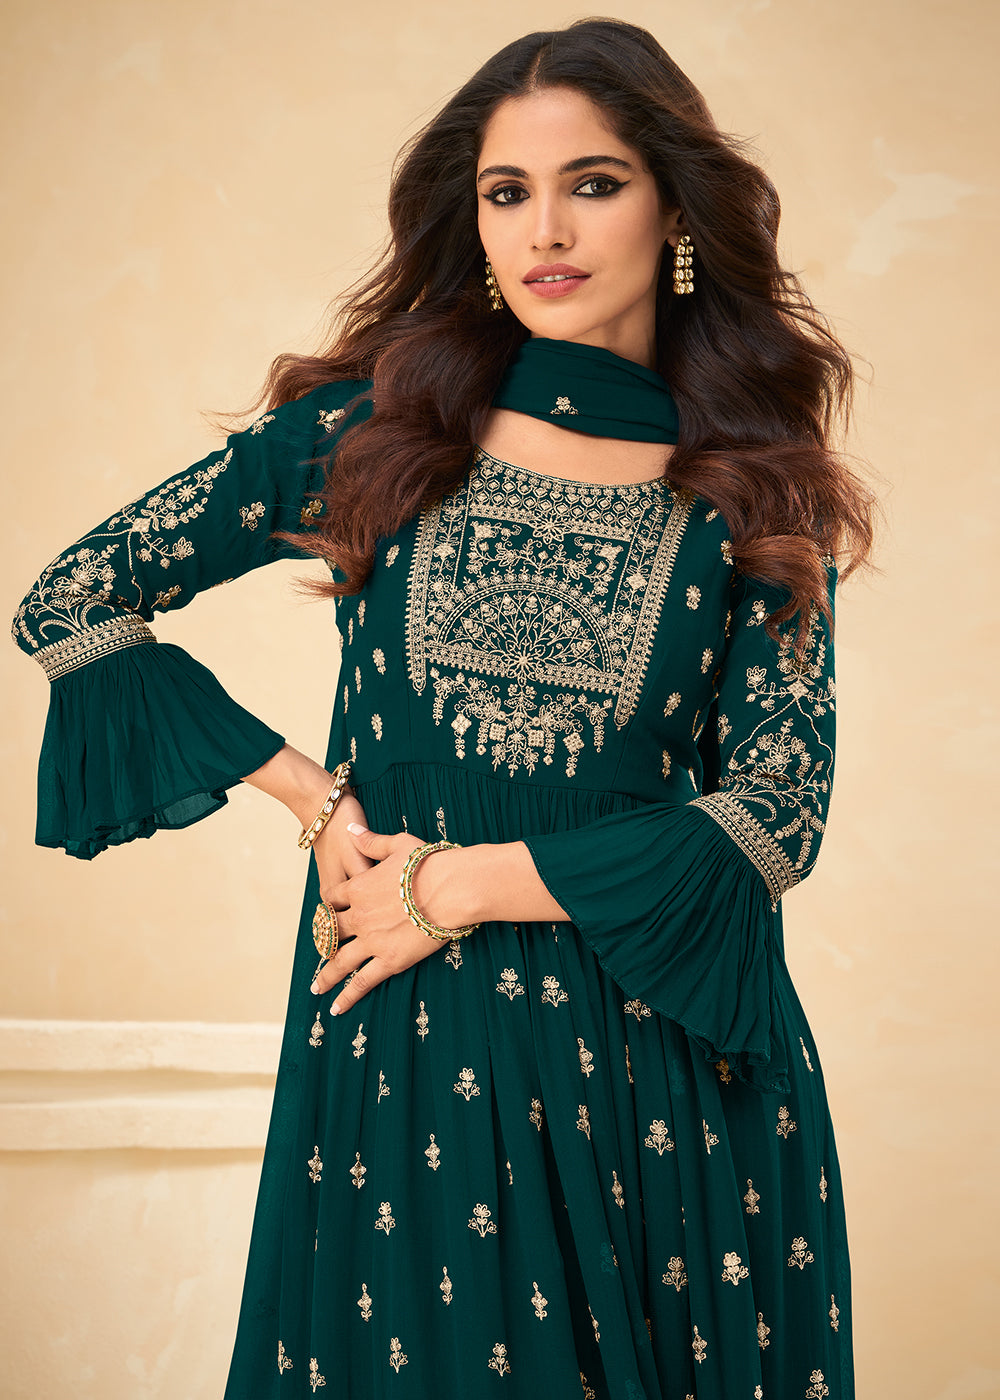 Buy Beautifully Embroidered Teal Green Suit - Festive Palazzo Suit